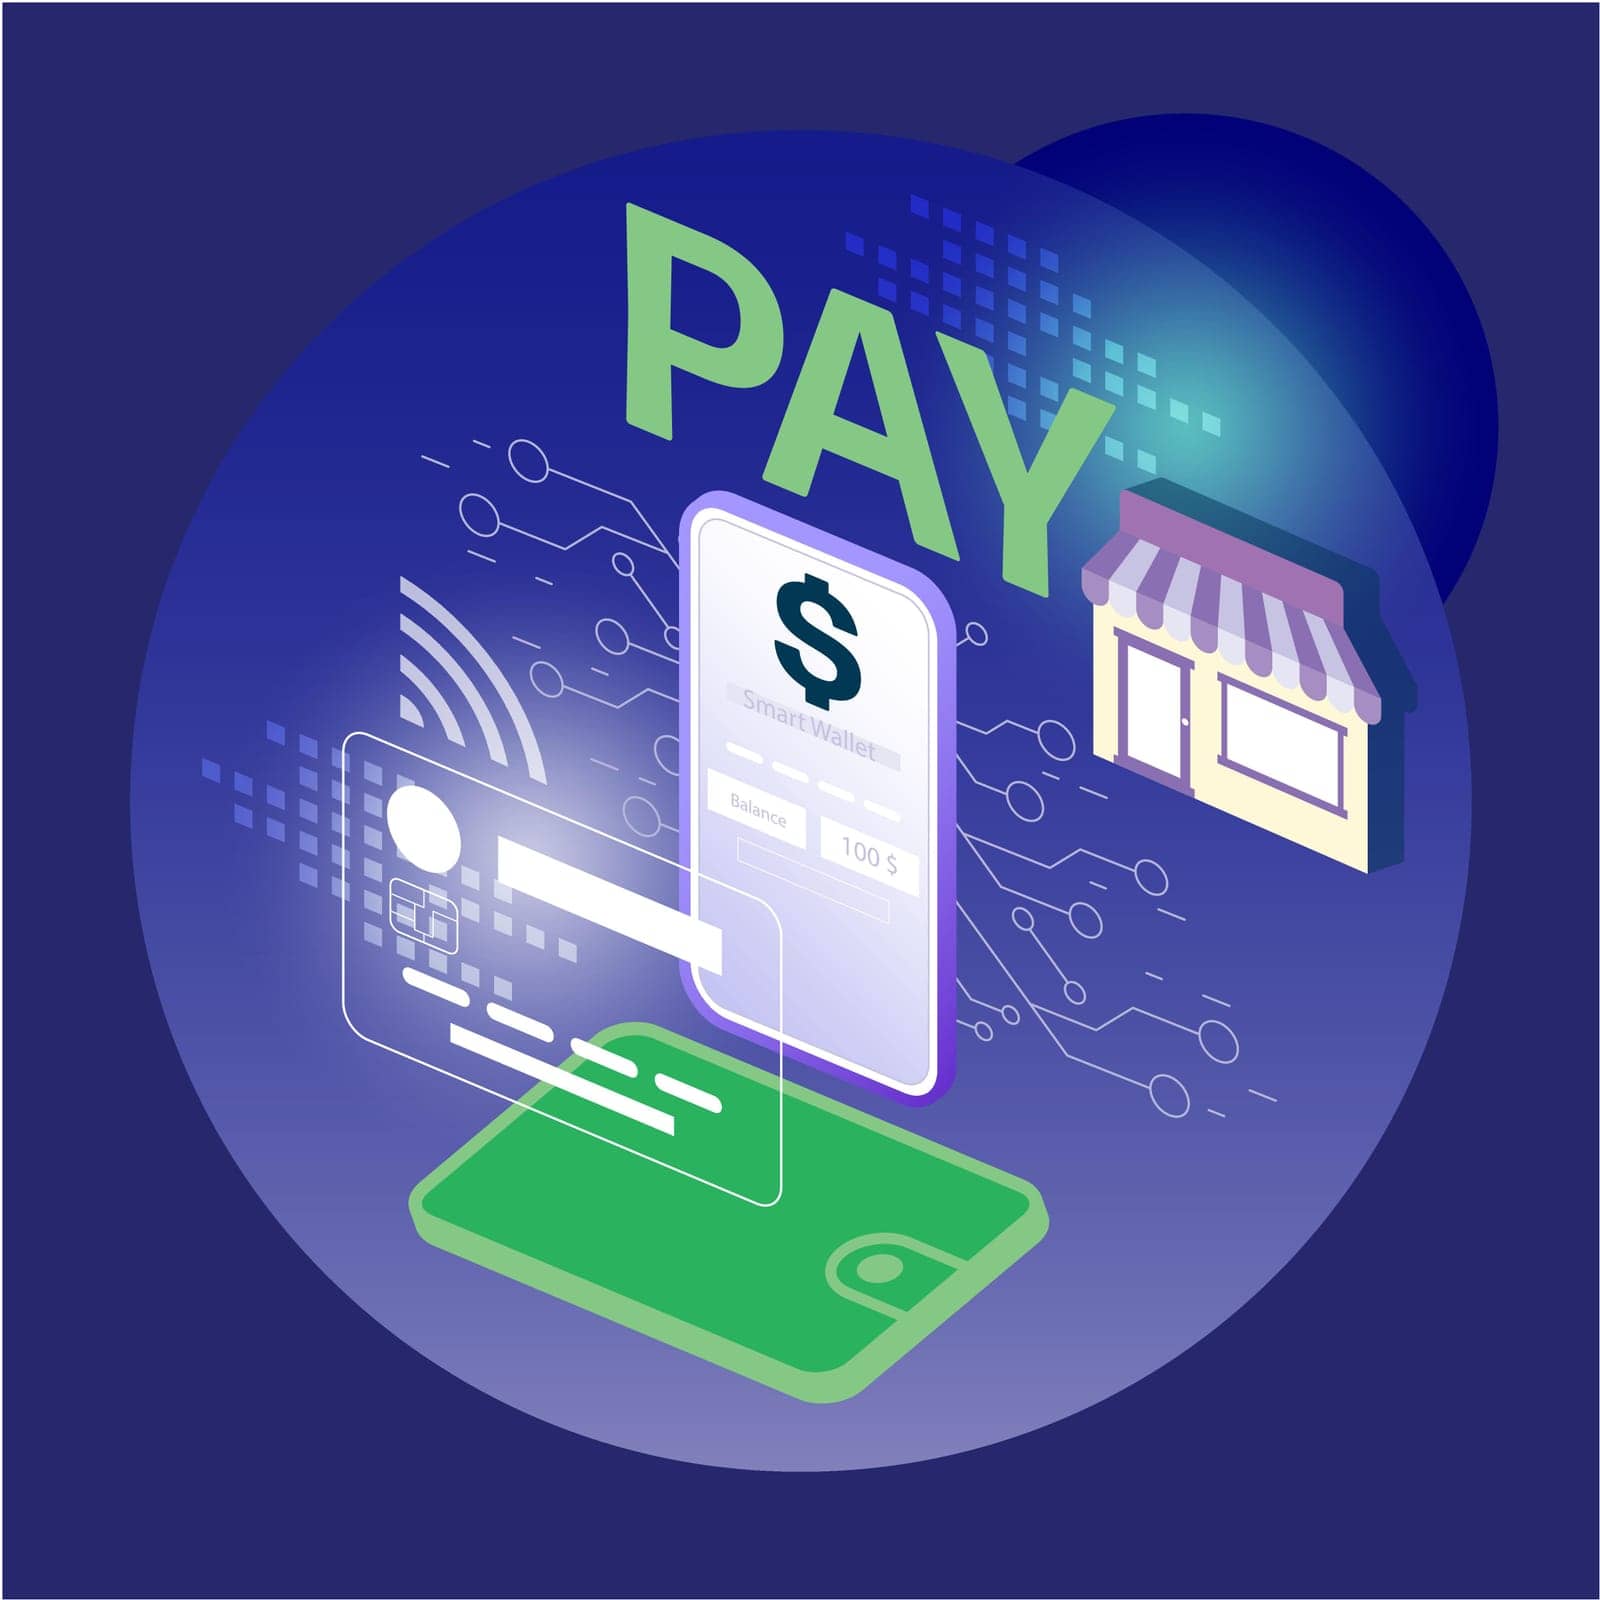 Smart wallet payment. Digital mobile banking service. Financial technology. Vector illustration isometric design style.